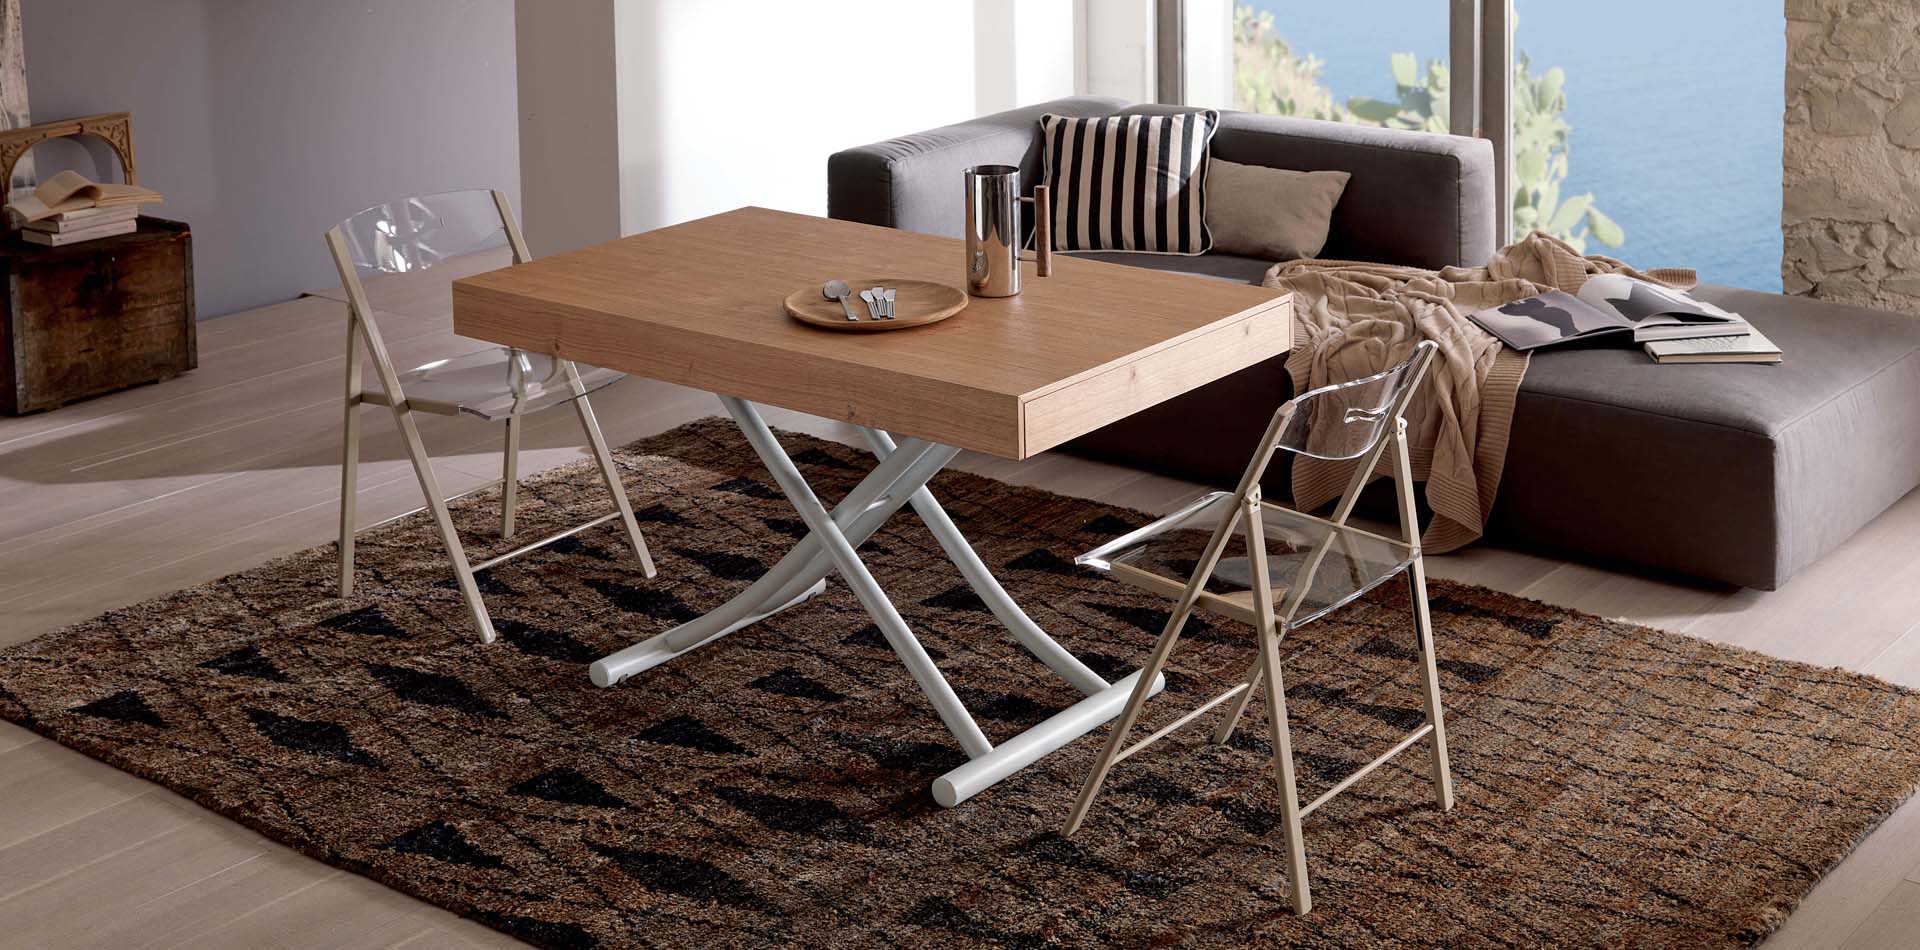 Multifunctional & Transformable Tables